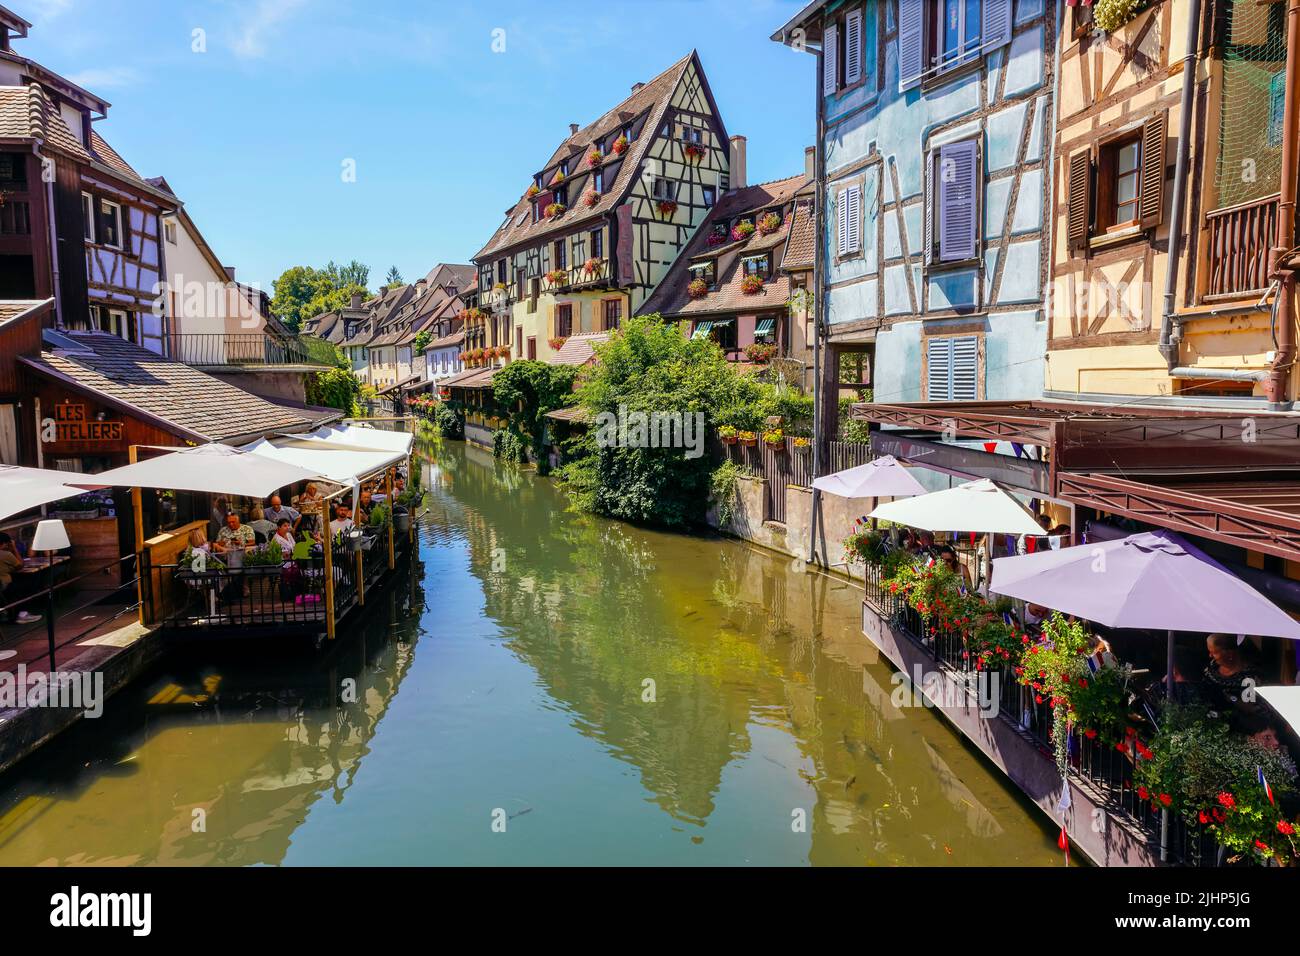 So-called Little Venice (Petite; Venise) by Lauch river in Colmar. Colorful traditional Alsatian houses in the historic town of Colmar, Alsace, France Stock Photo